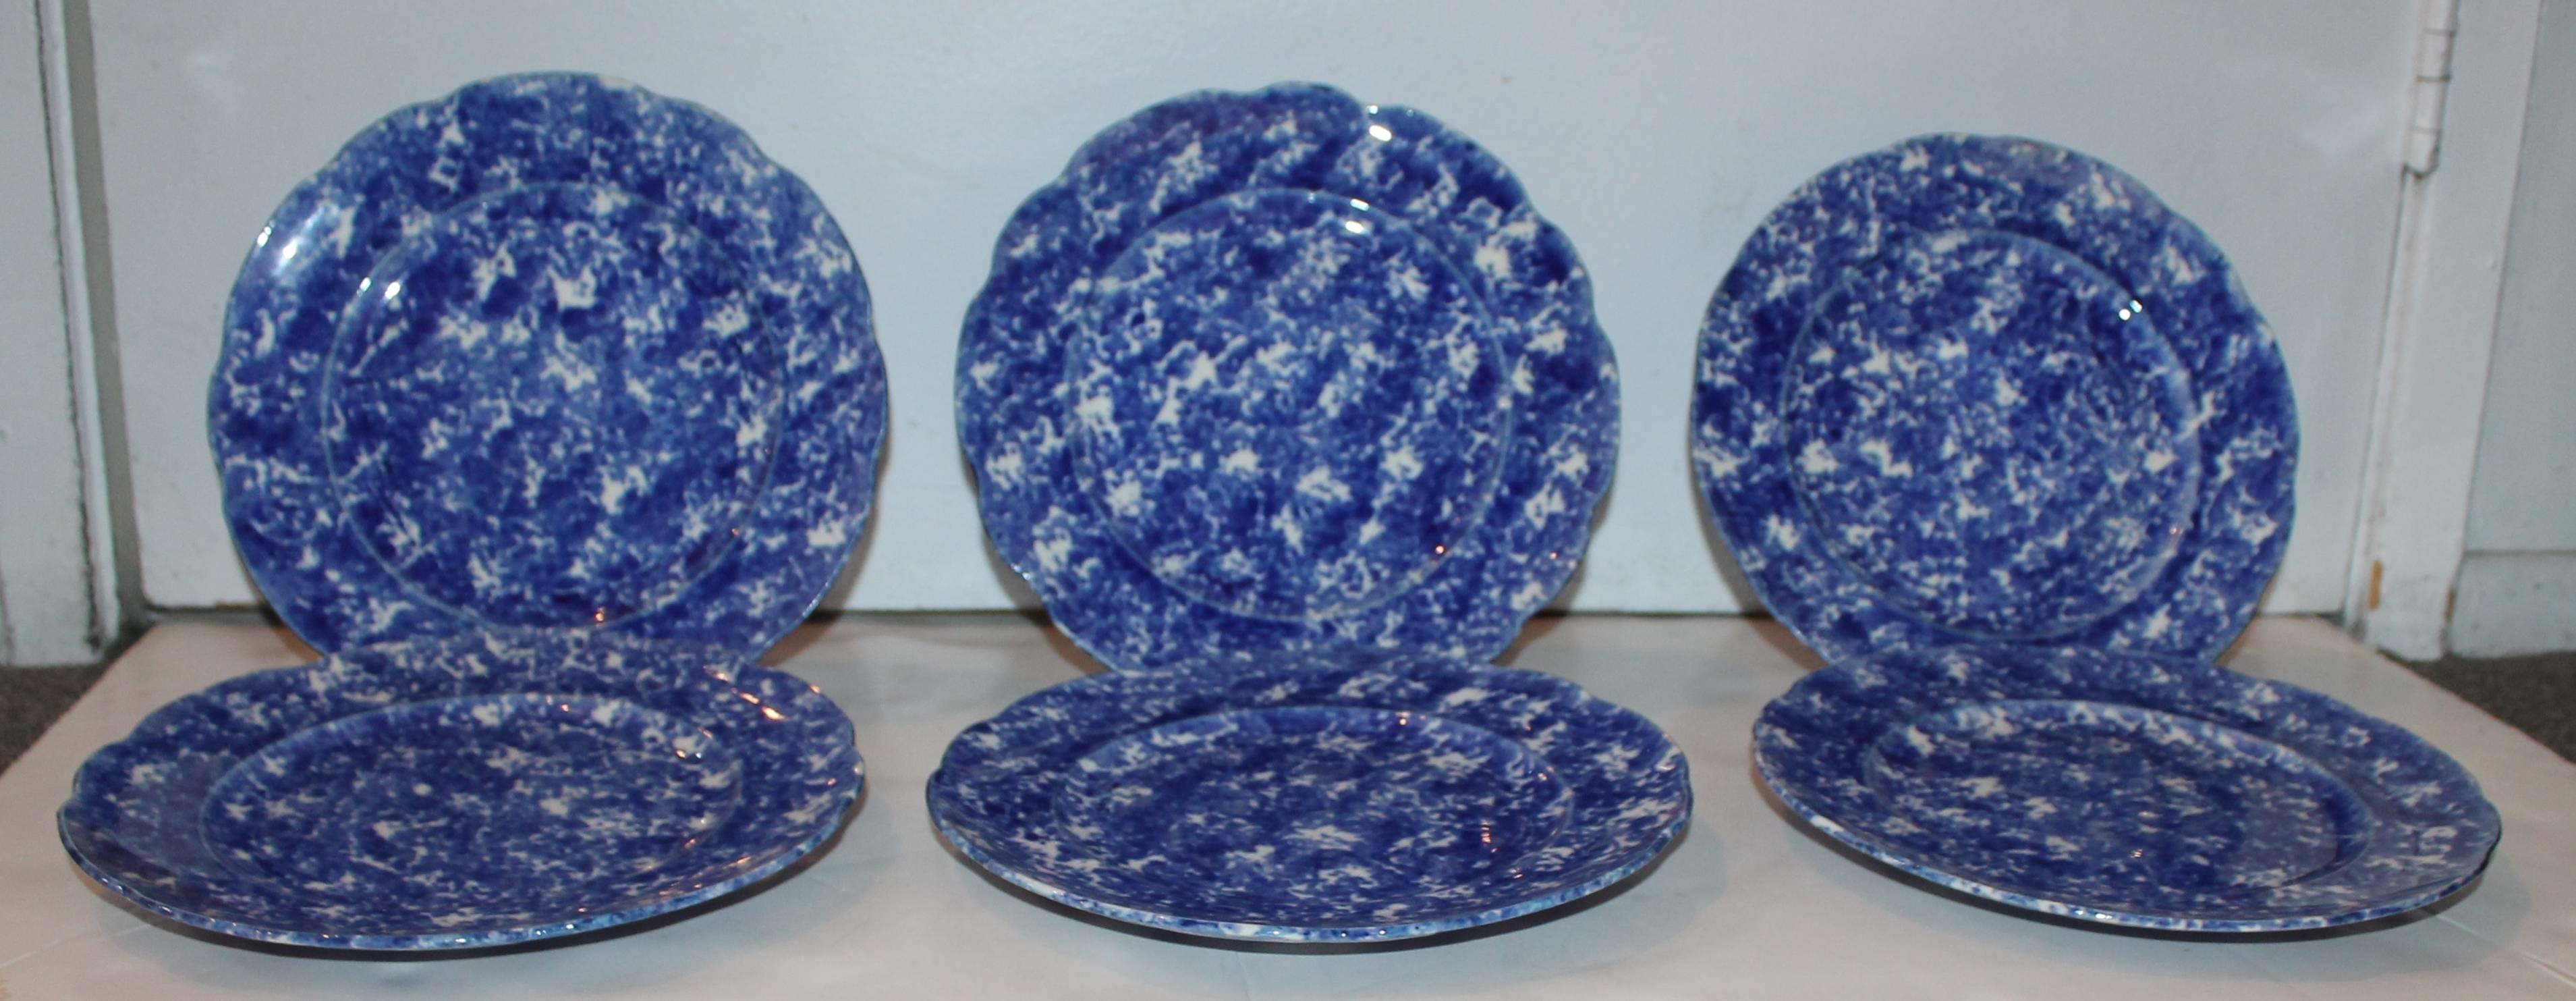 This is like a collectors dream! Set of six matching blue and white 19th century sponge ware dinner plates. The entire group are in pristine condition. The sponge pattern is on both sides.